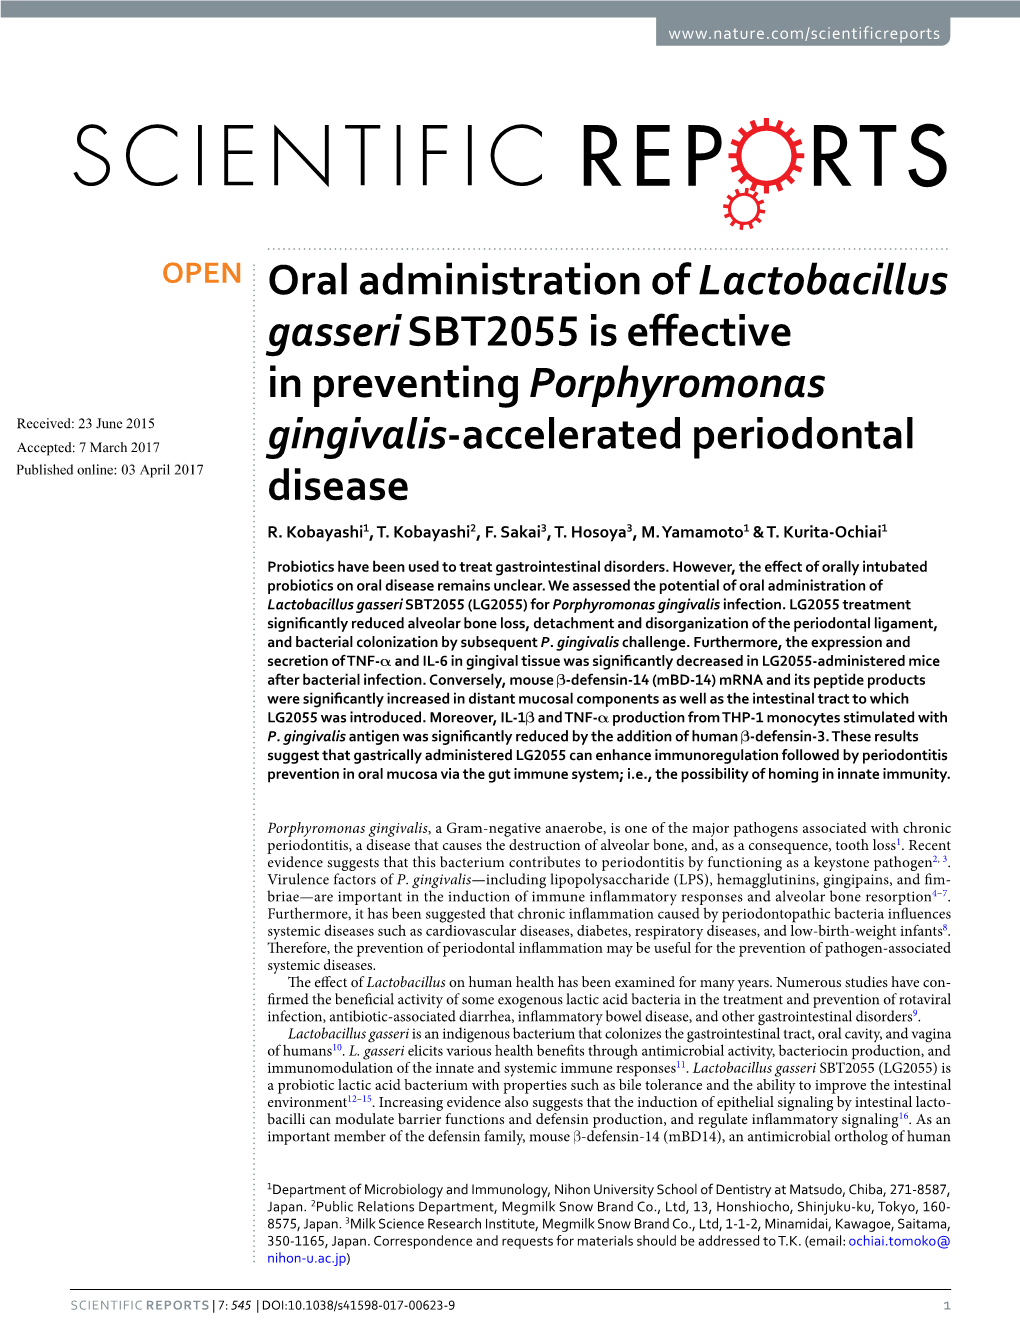 Oral Administration of Lactobacillus Gasseri SBT2055 Is Effective In